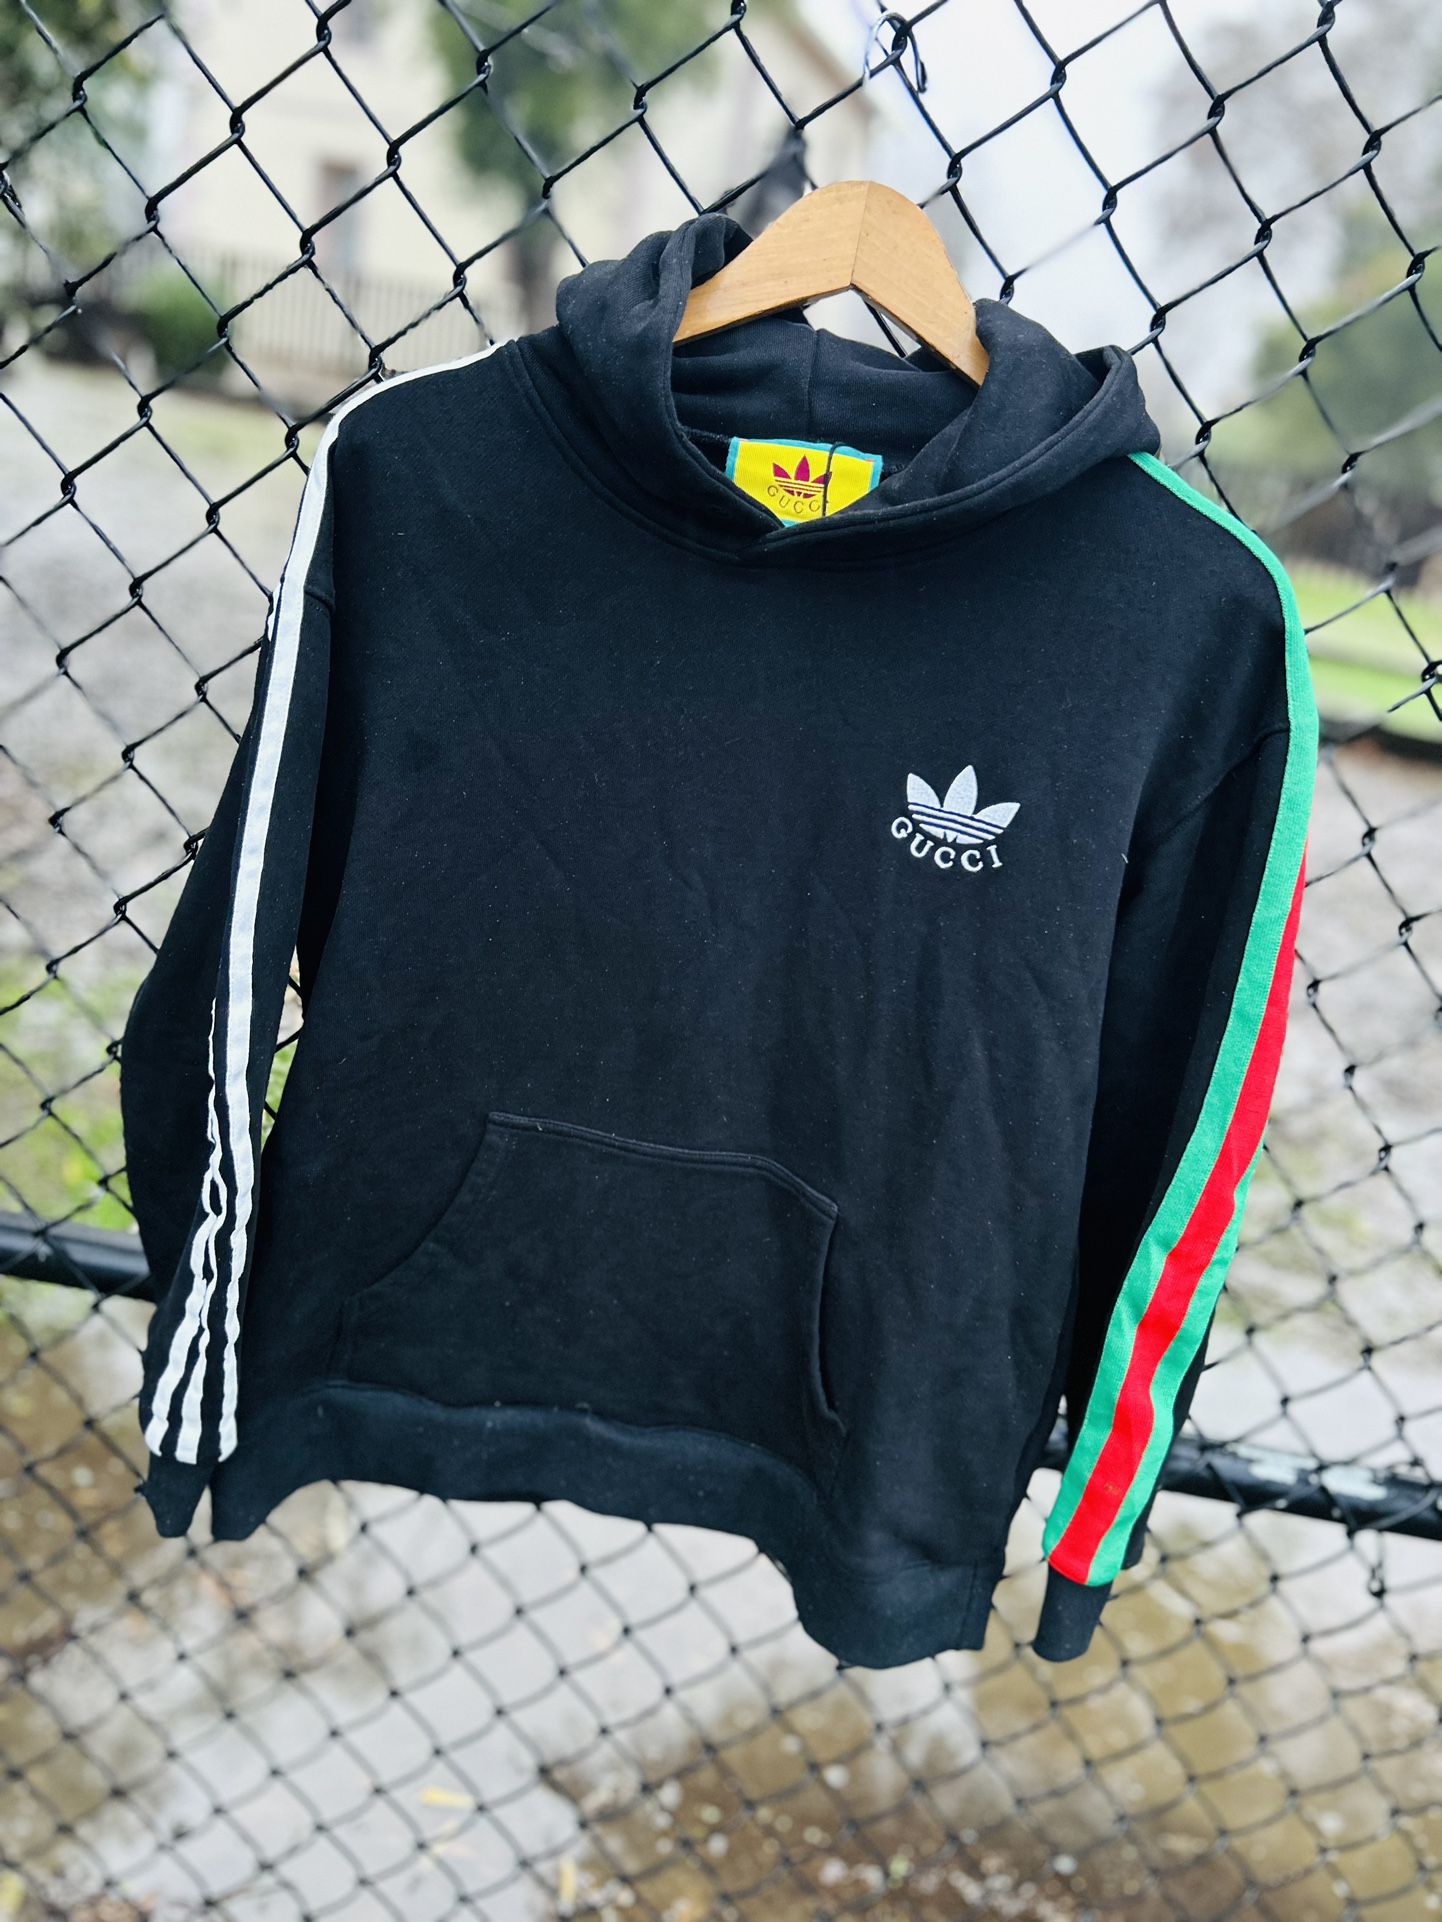 GUCCI x adidas COLLECTION** Black Hooded Seatshirt for Sale in Los Angeles,  CA - OfferUp